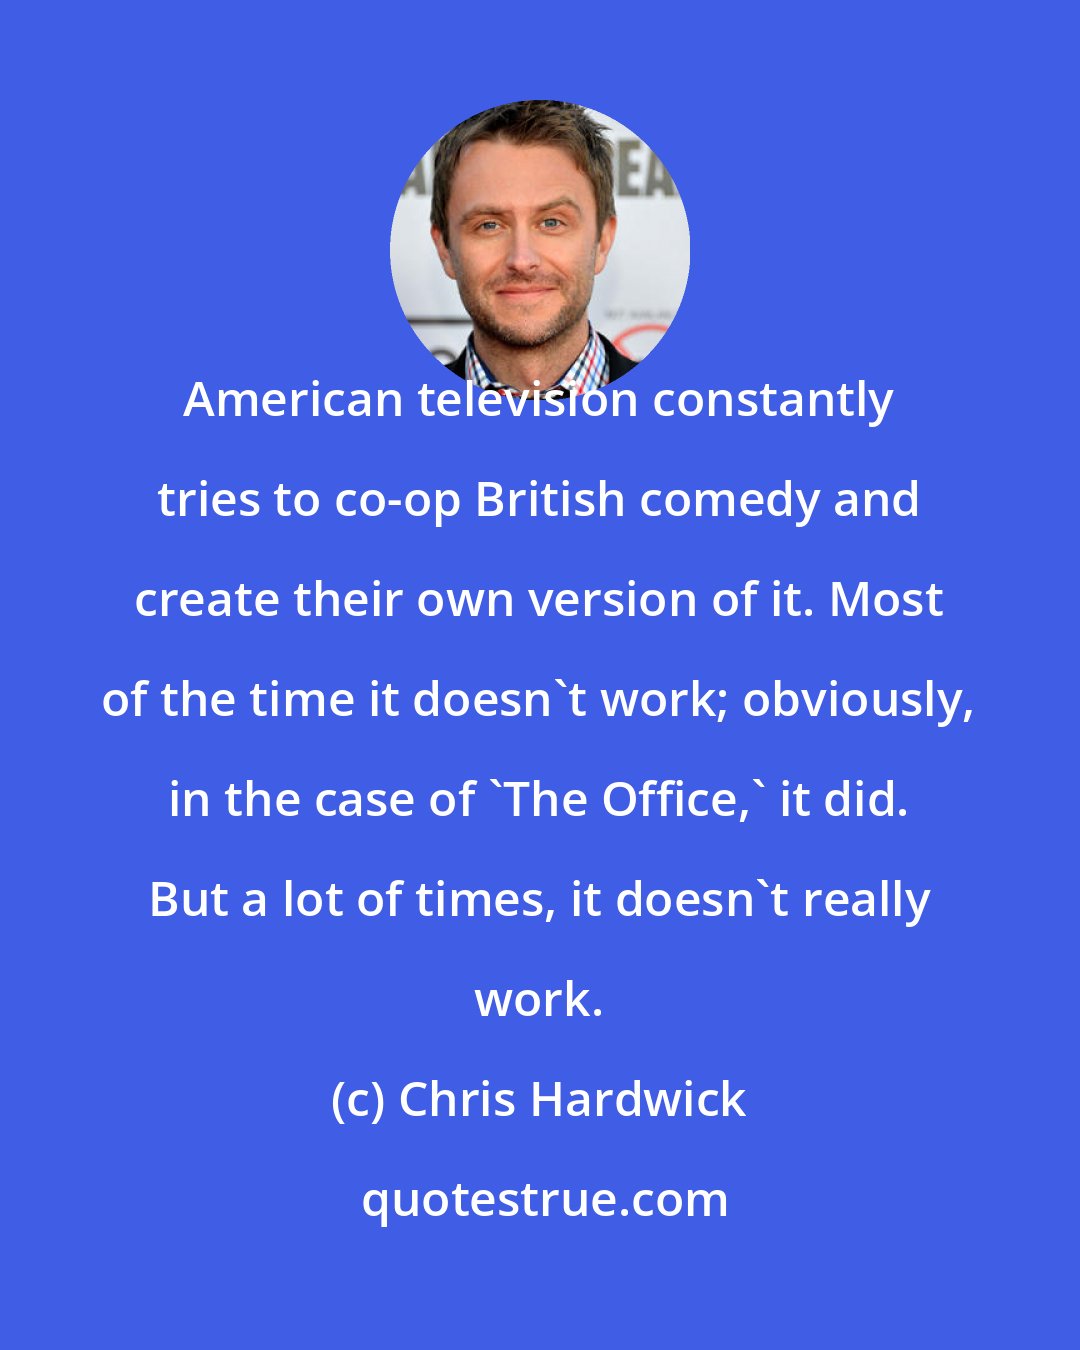 Chris Hardwick: American television constantly tries to co-op British comedy and create their own version of it. Most of the time it doesn't work; obviously, in the case of 'The Office,' it did. But a lot of times, it doesn't really work.